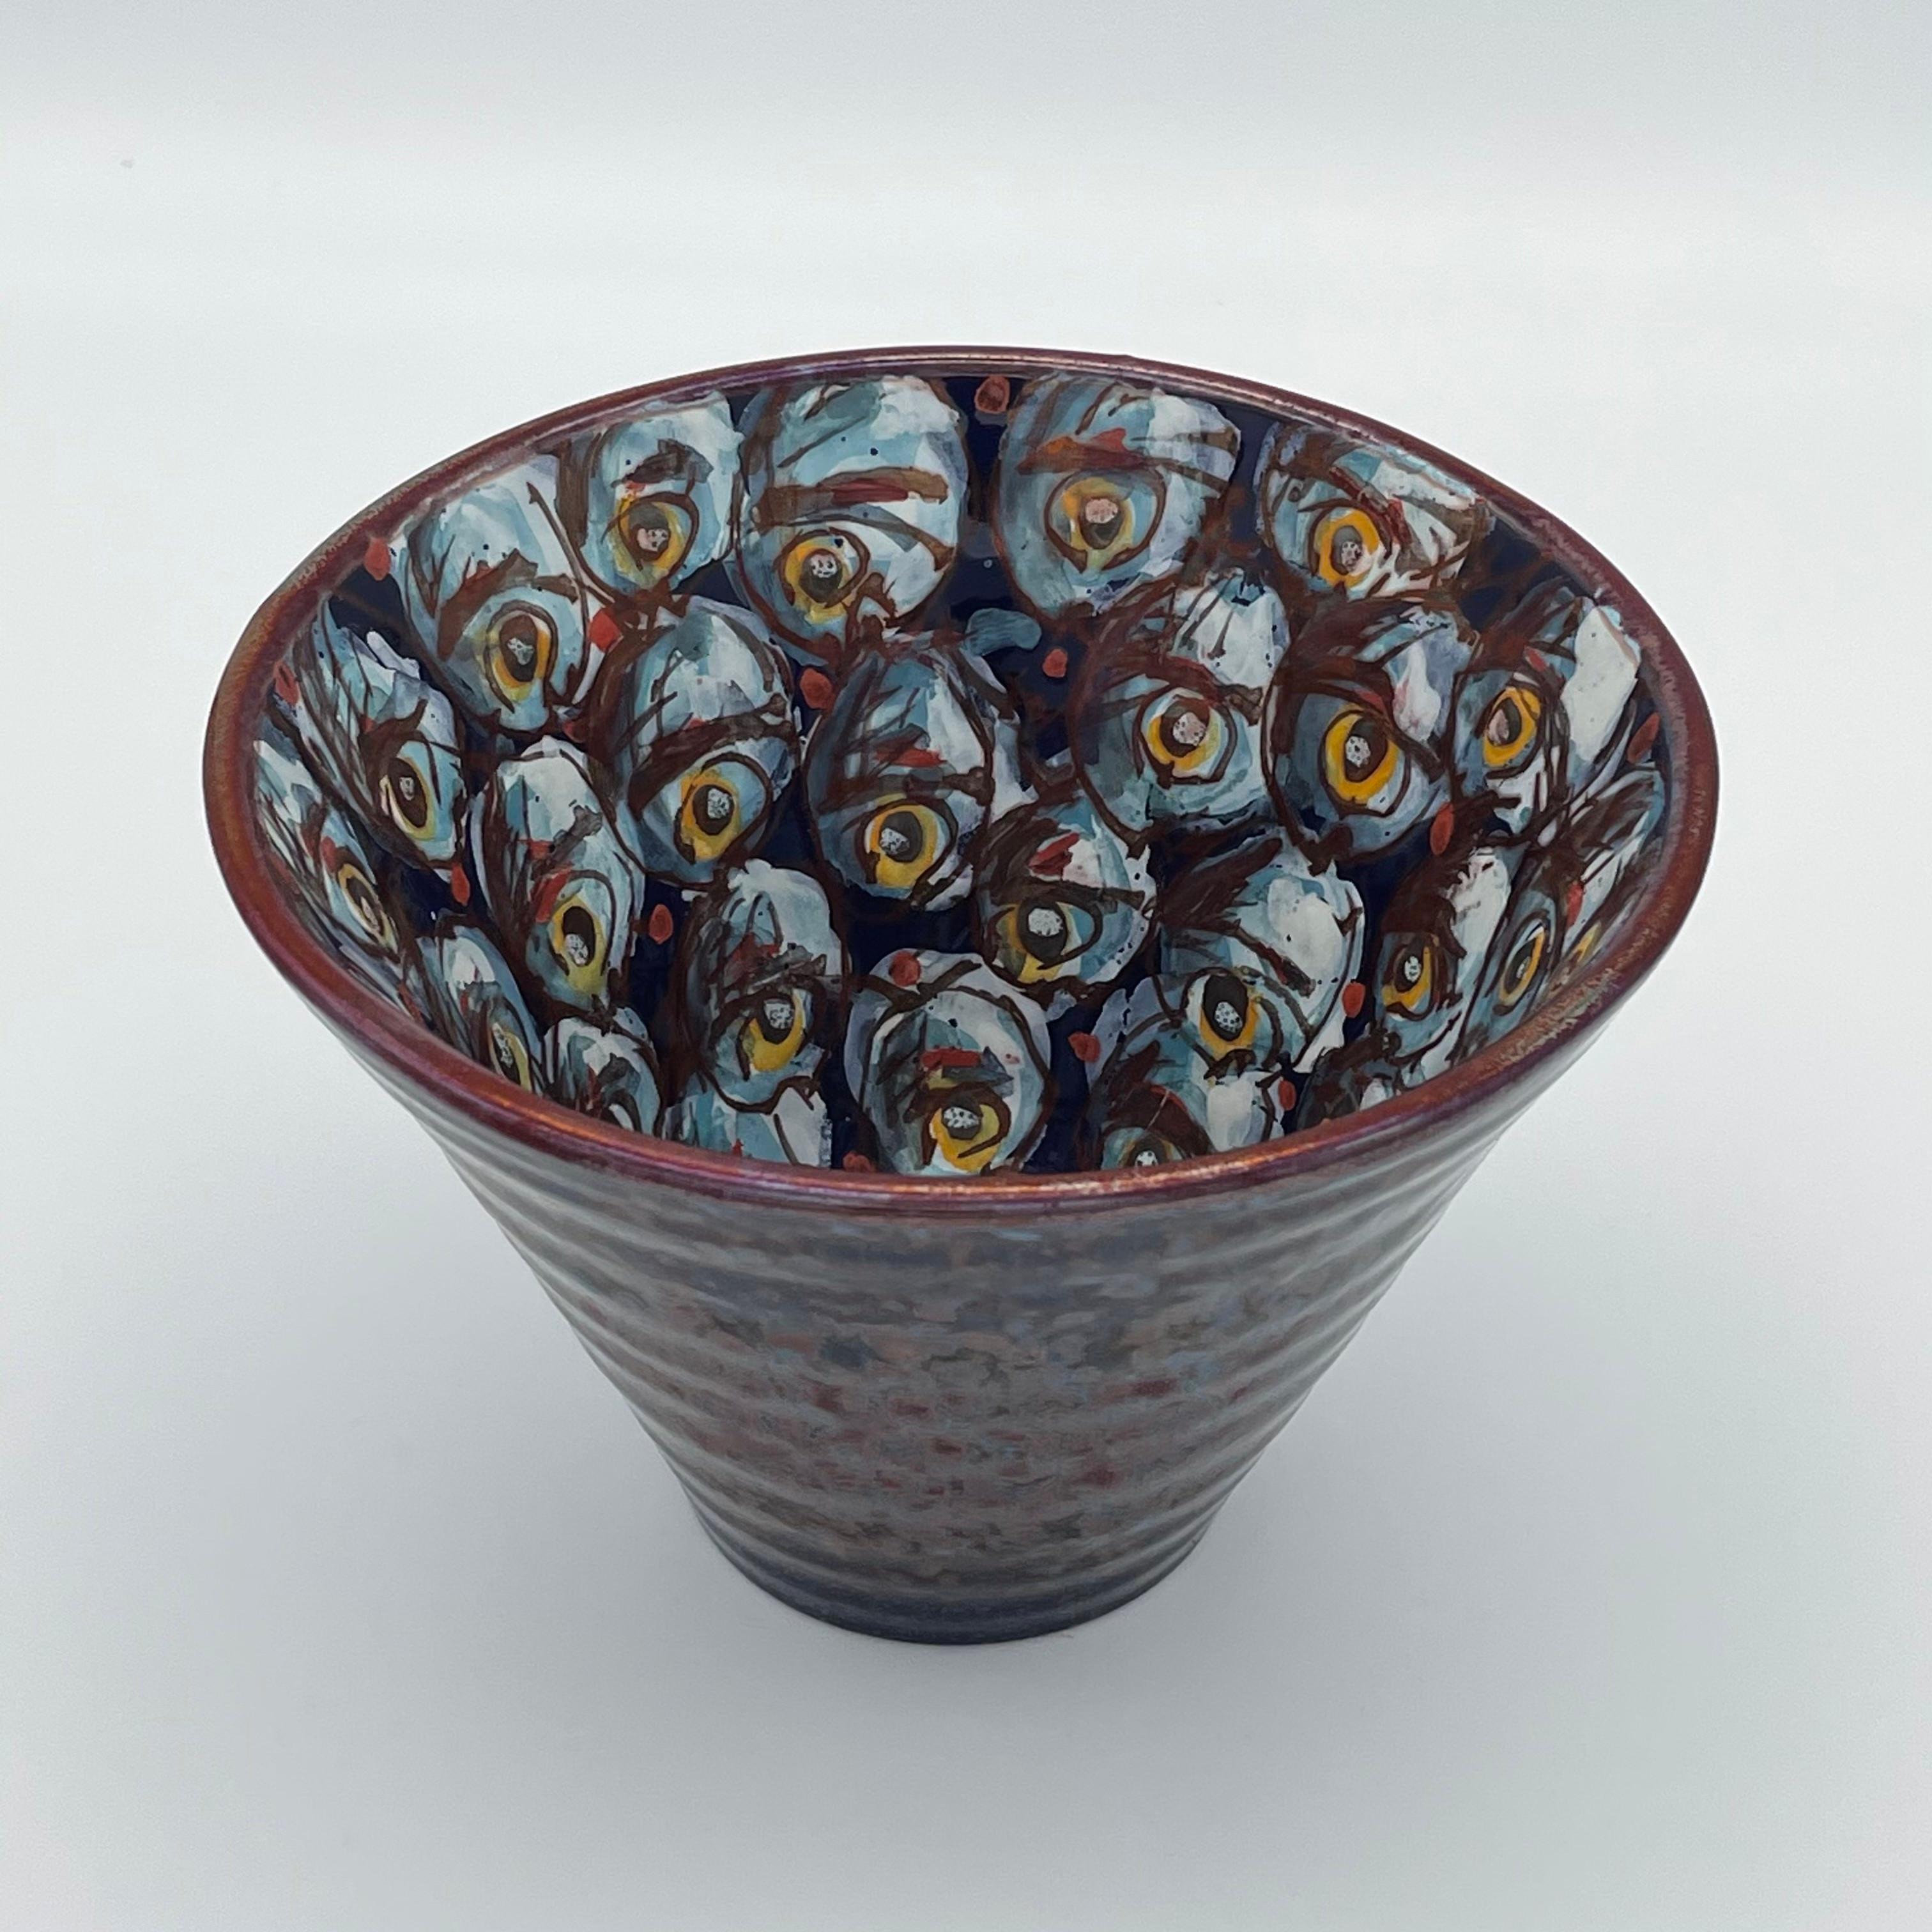 Small conical jar, 2021, full-fire reduction faience earthenware 15 cm diameter x 10 cm height, hand painted unique piece.


Bottega Vignoli is a brand of artistic ceramics based in Faenza, one of the most representative ceramic production